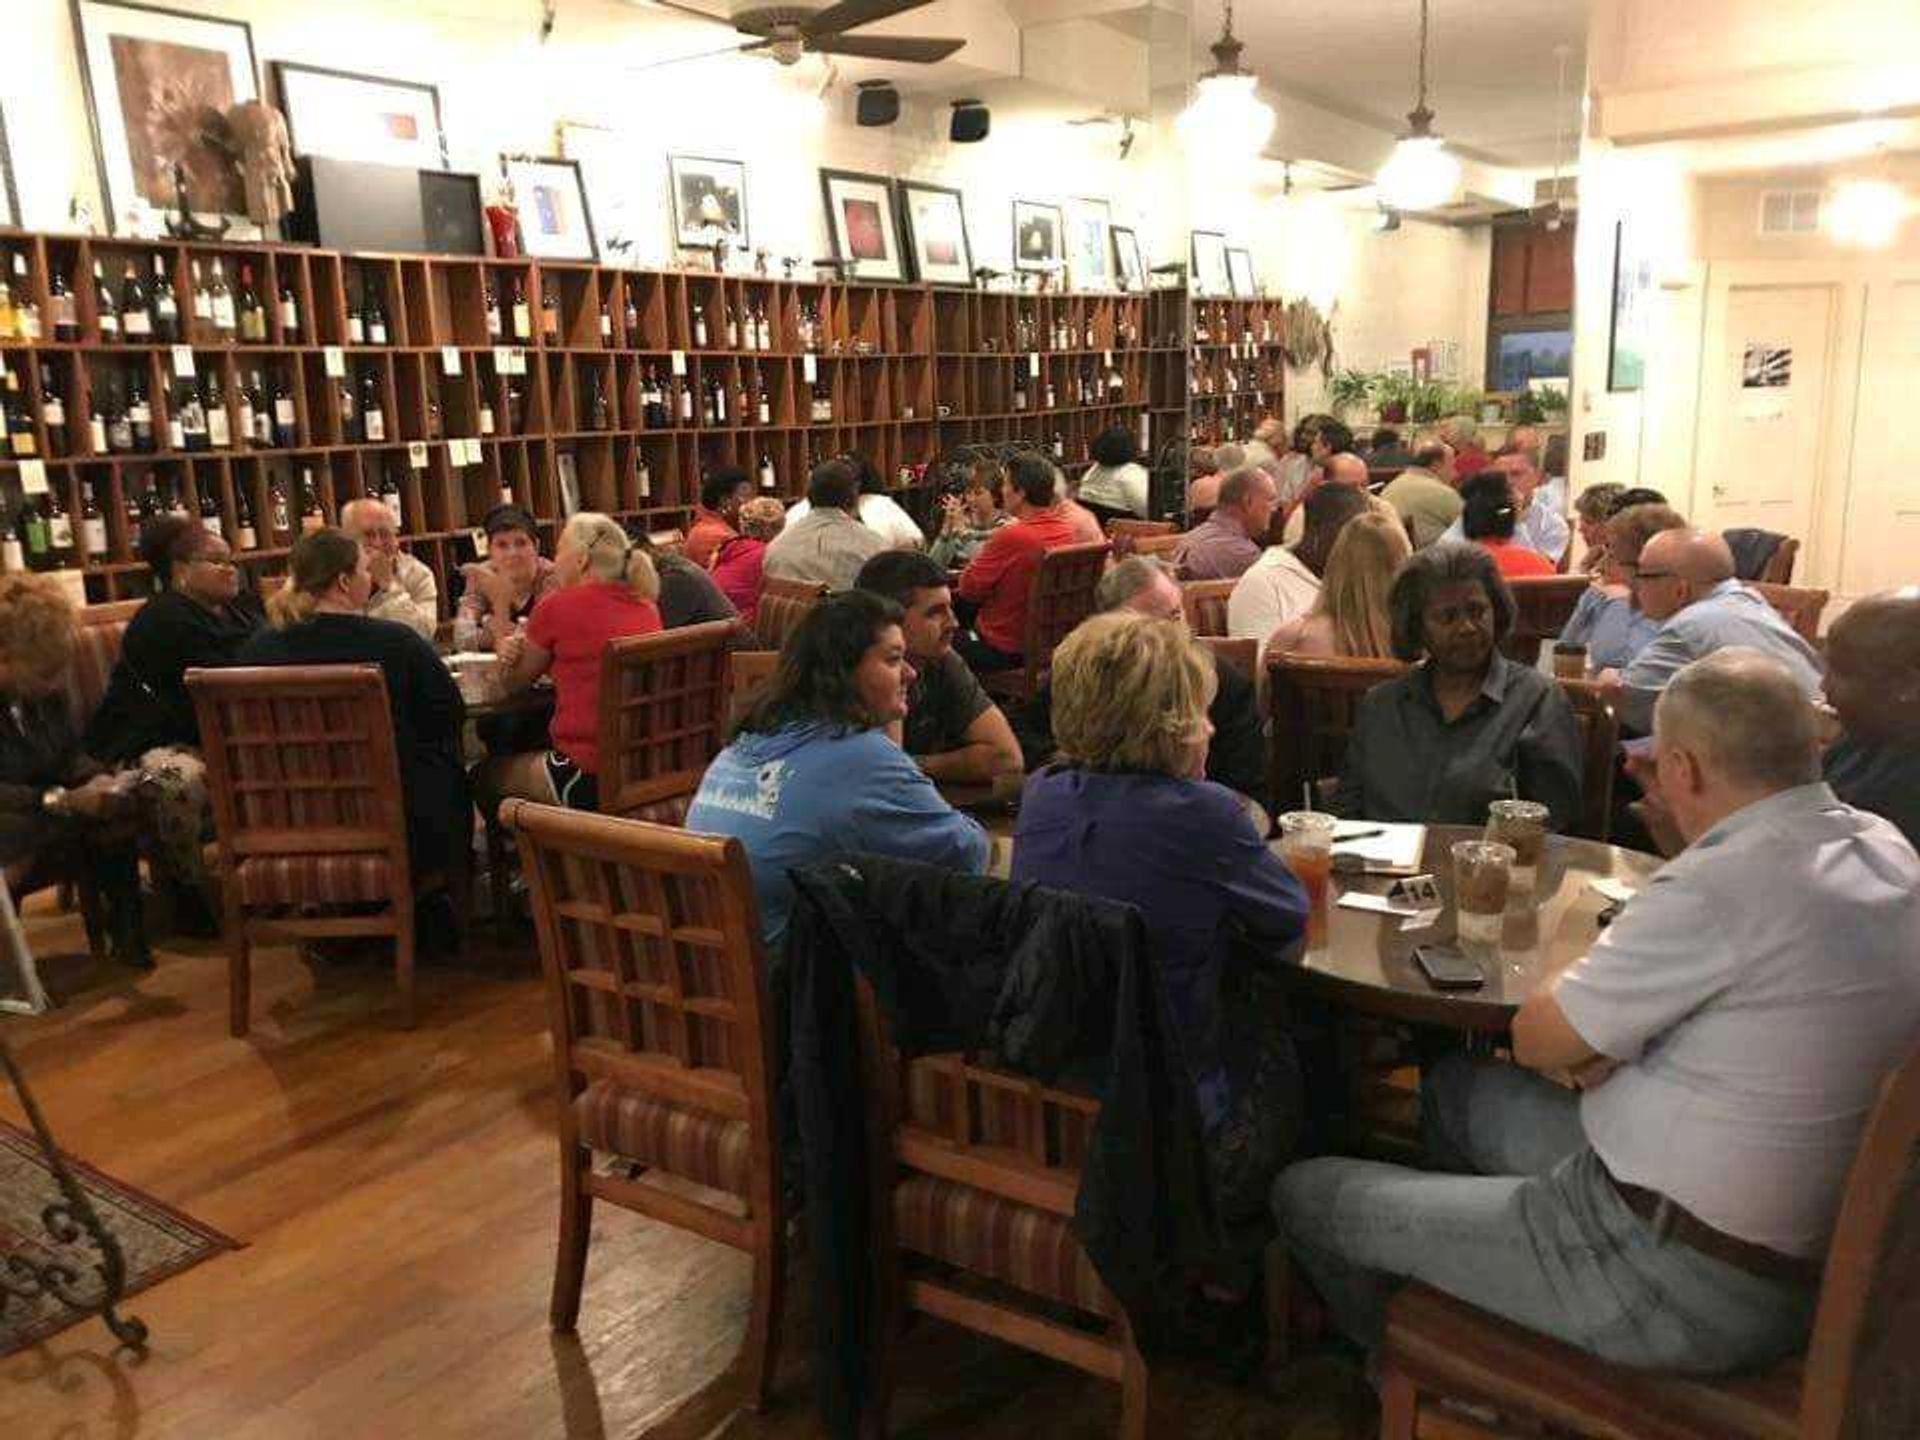 Community Conversations is hosted at Cup 'n' Cork, at the corner of Spanish and Independence streets in downtown Cape Girardeau at 6:30 p.m. on Tuesday nights.